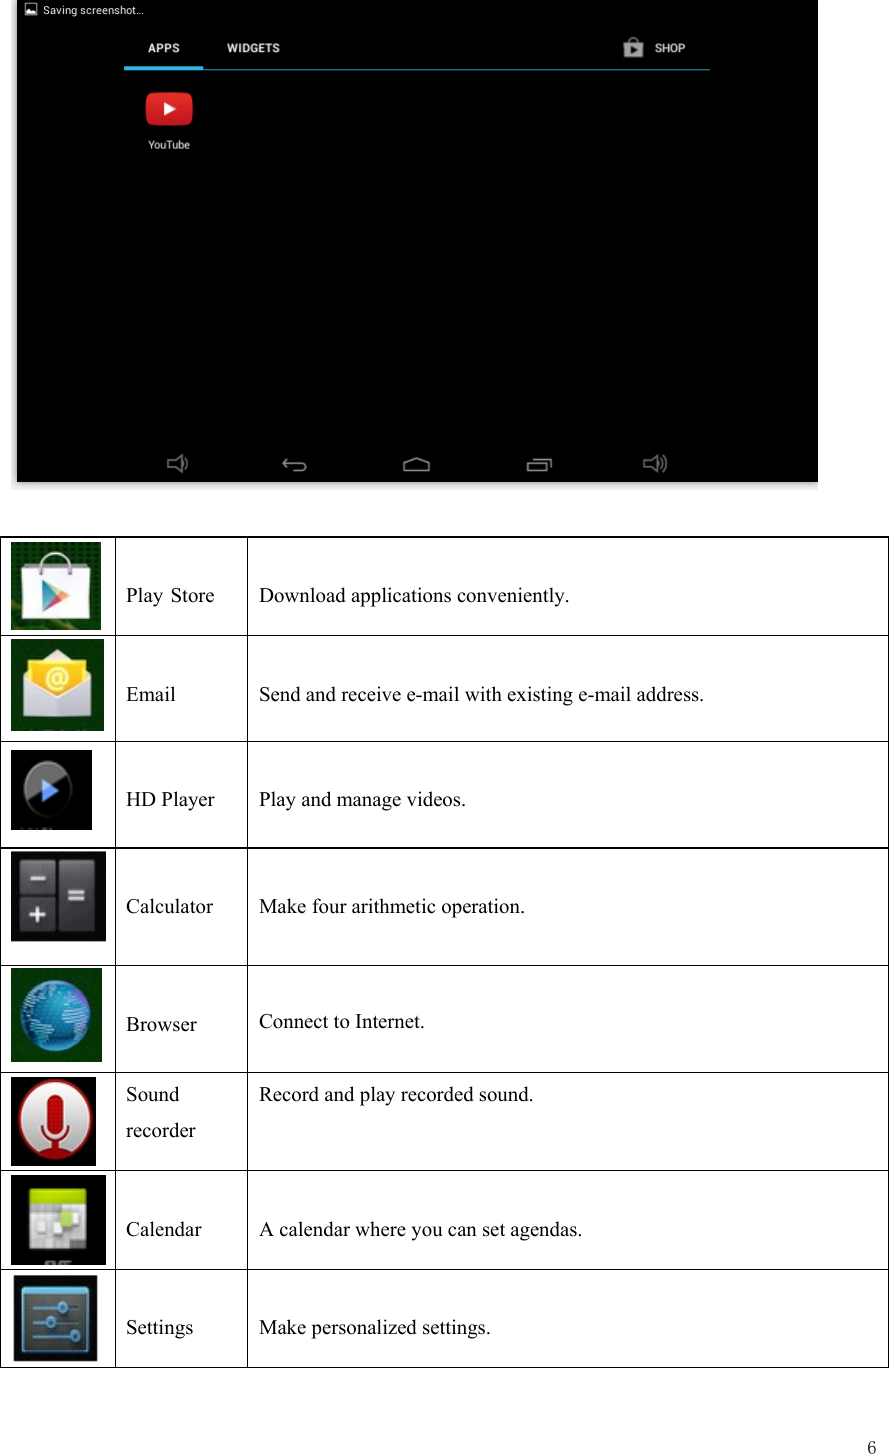  6      Play Store  Download applications conveniently.   Email  Send and receive e-mail with existing e-mail address.   HD Player  Play and manage videos.   Calculator   Make four arithmetic operation.   Browser  Connect to Internet.   Sound recorder Record and play recorded sound.   Calendar  A calendar where you can set agendas.   Settings  Make personalized settings. 